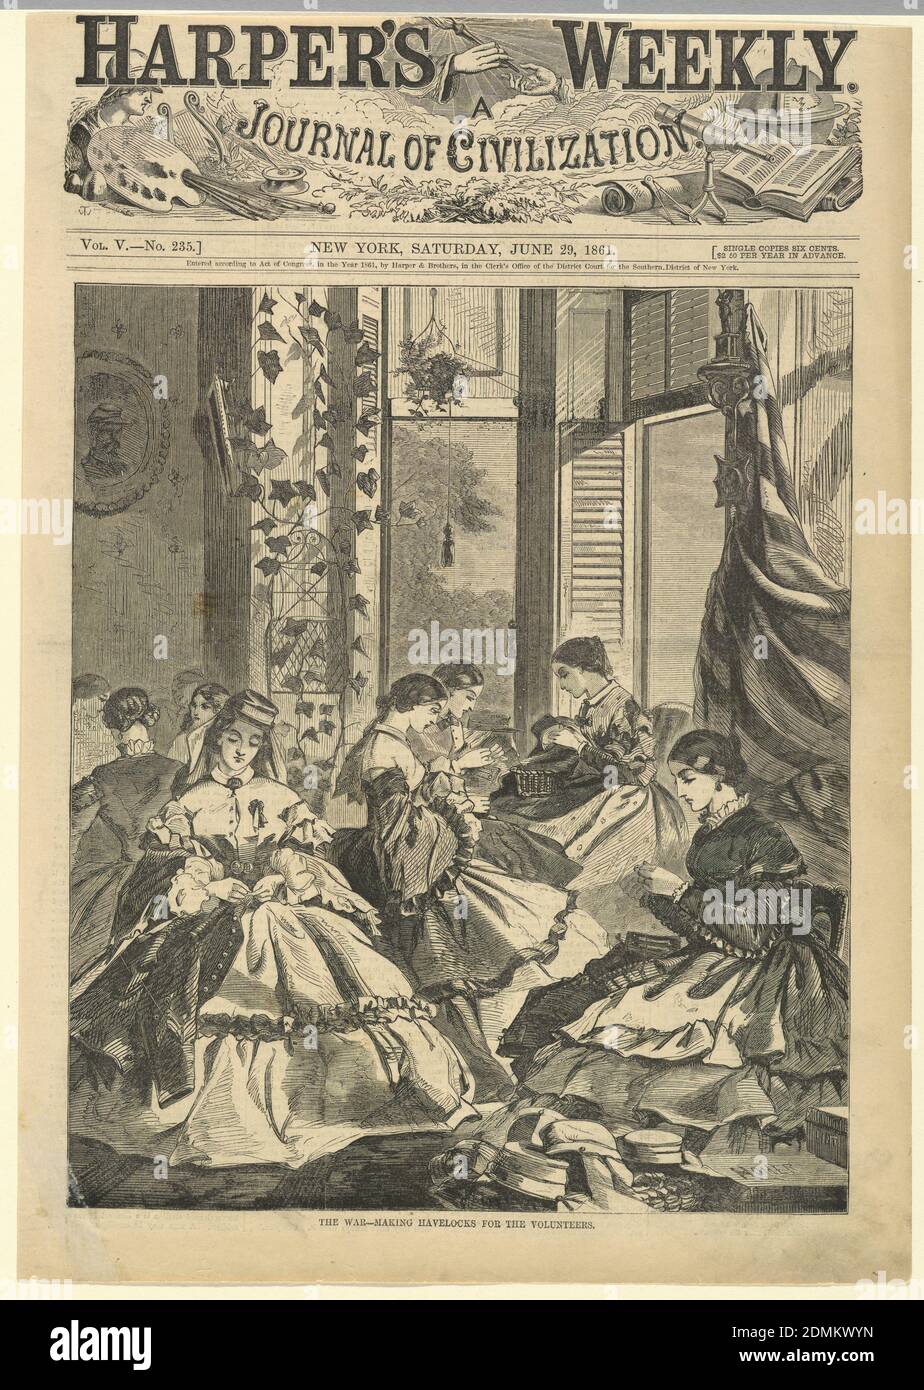 The War - Making Havelocks for the Volunteers, from Harper's Weekly, June 29, 1861, p. 401., Winslow Homer, American, 1836–1910, Wood engraving in black ink on newsprint paper., Vertical view of an interior with a group of women sewing in the foreground., June 29, 1861, graphic design, Print Stock Photo